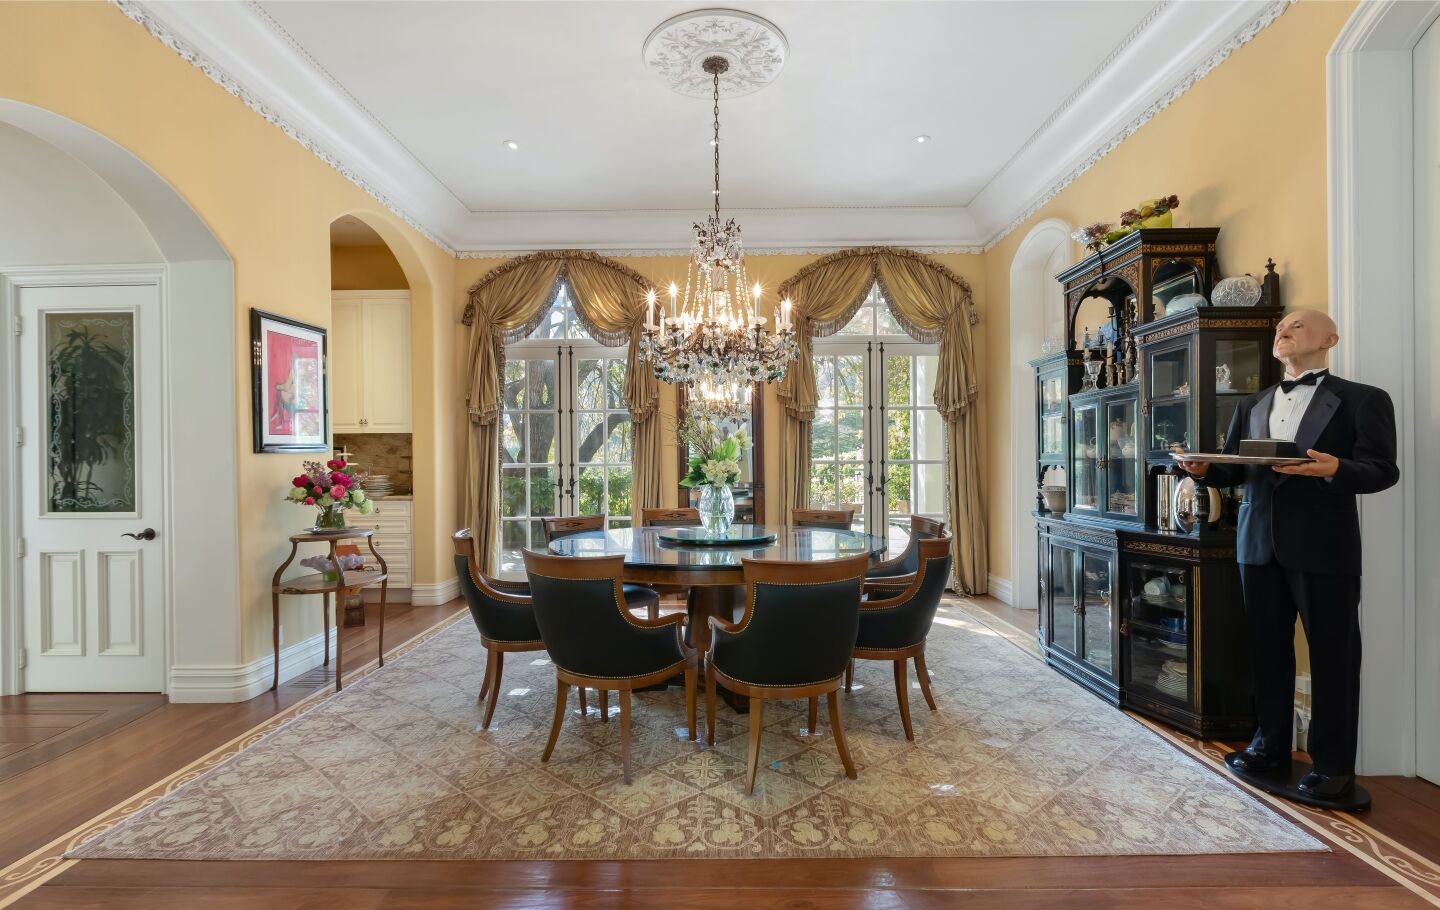 The formal dining room.